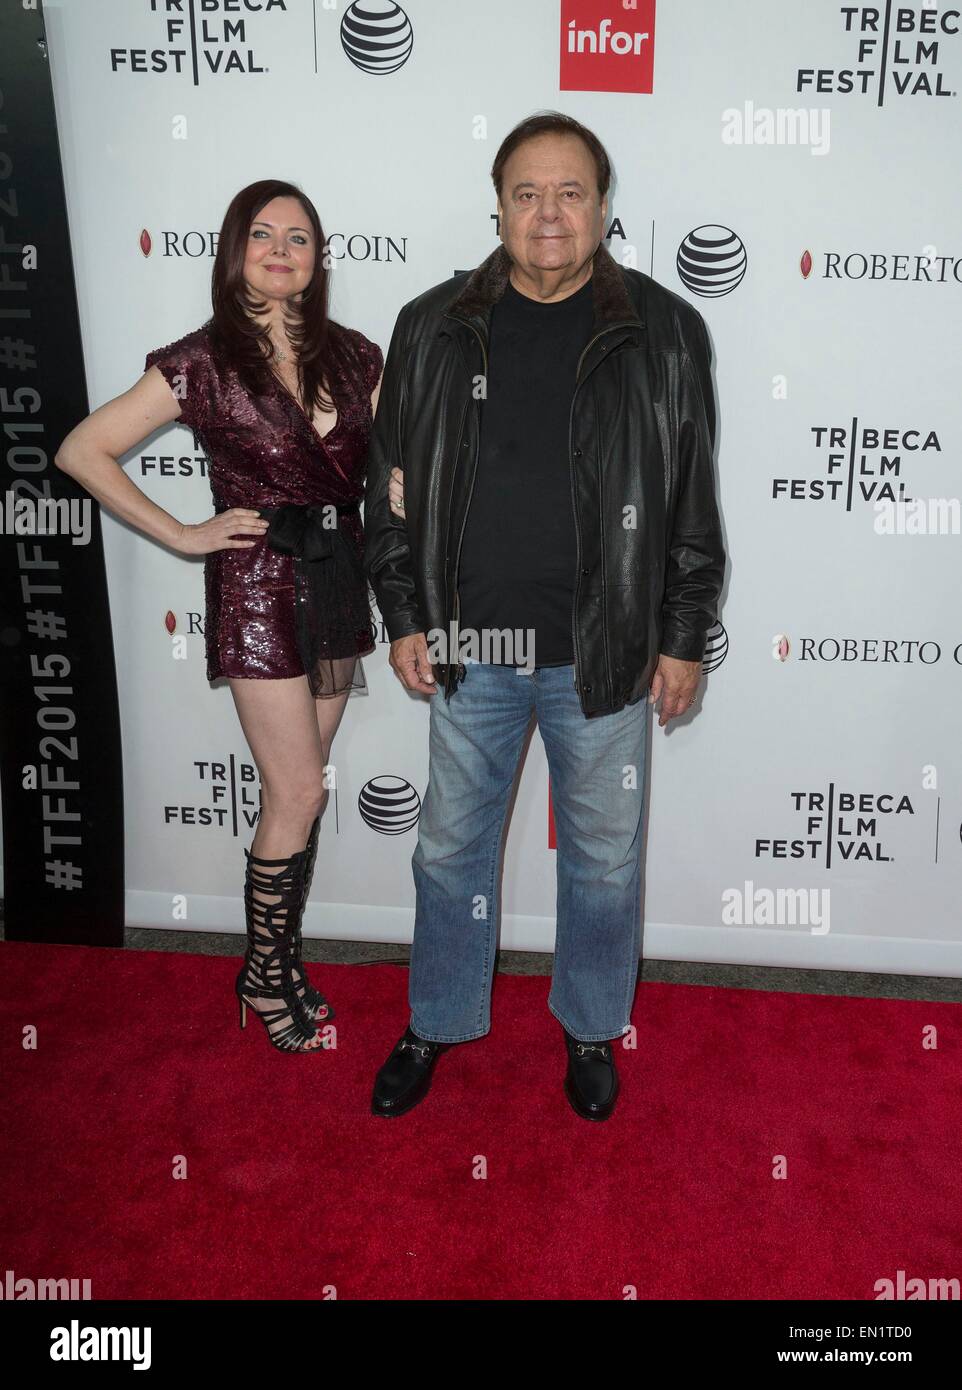 New York, NY, USA. 25th Apr, 2015. Dee Dee Benkie, Paul Sorvino at arrivals for Tribeca Film Festival's CLOSING NIGHT, 25th anniversary of GOODFELLAS, co-sponsored by Infor and Roberto Coin, The Beacon Theatre, New York, NY April 25, 2015. Credit:  Lev Radin/Everett Collection/Alamy Live News Stock Photo